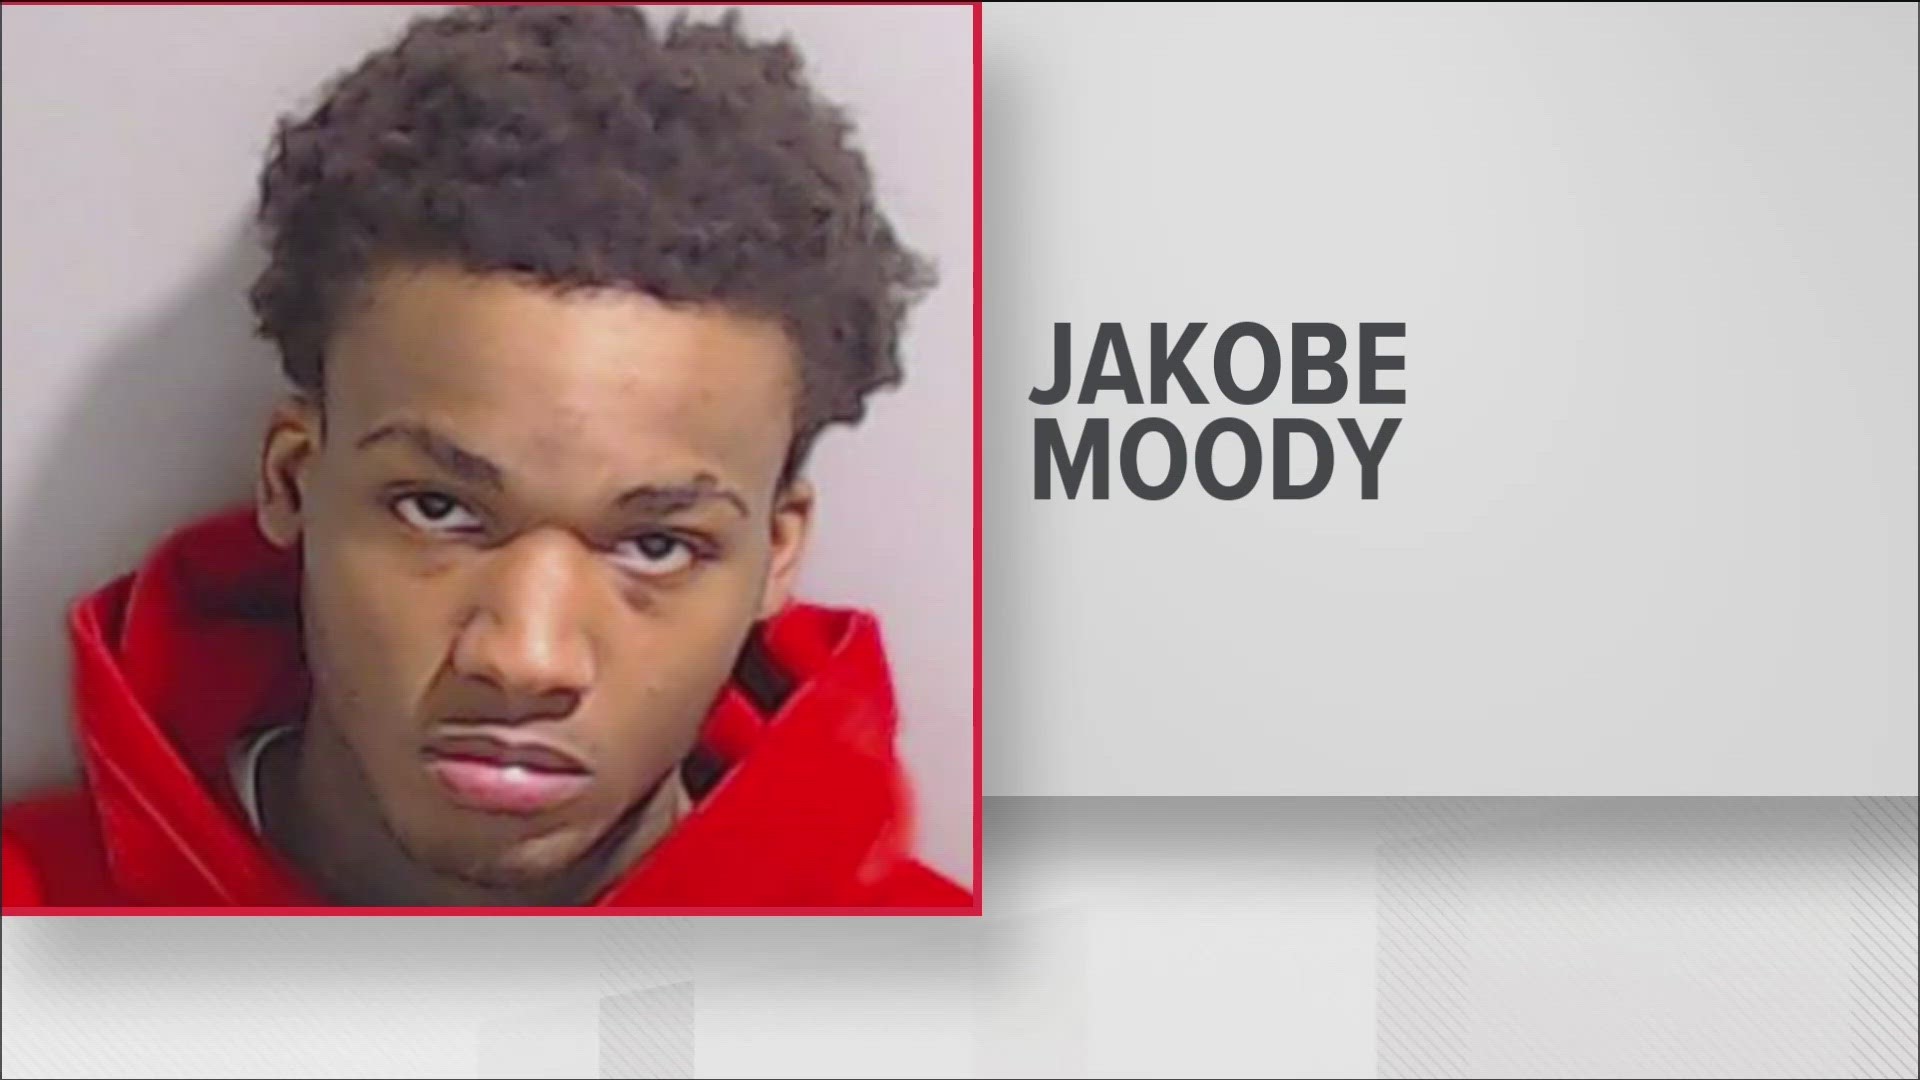 Jakobe Moody was taken into custody in connection to a deadly shooting that took the life of 28-year-old Tremaine Glasper.